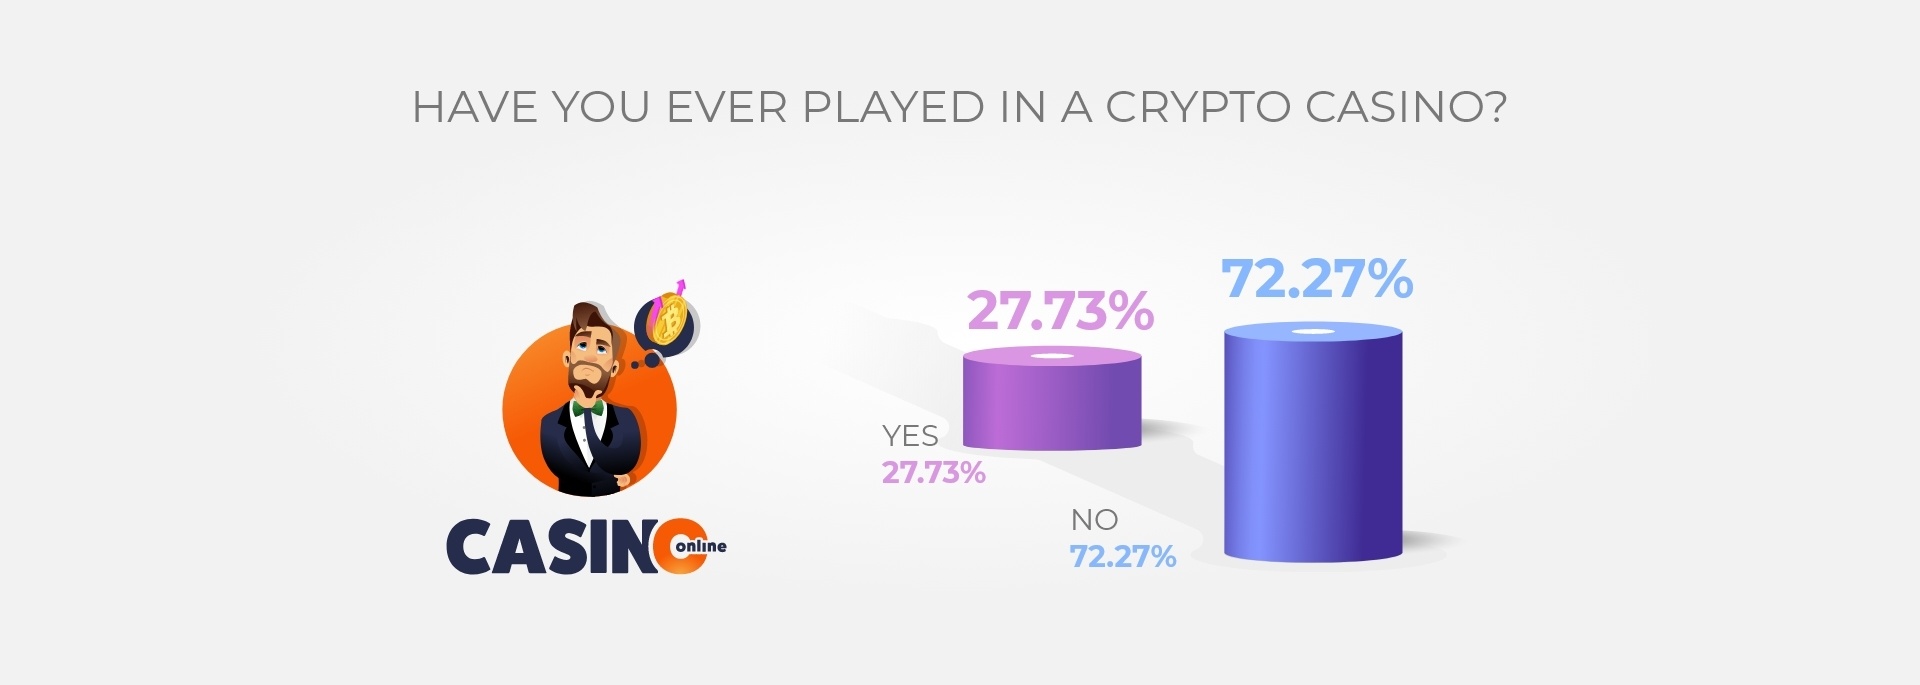 Have-you-ever-played-in-a-Crypto-Casino